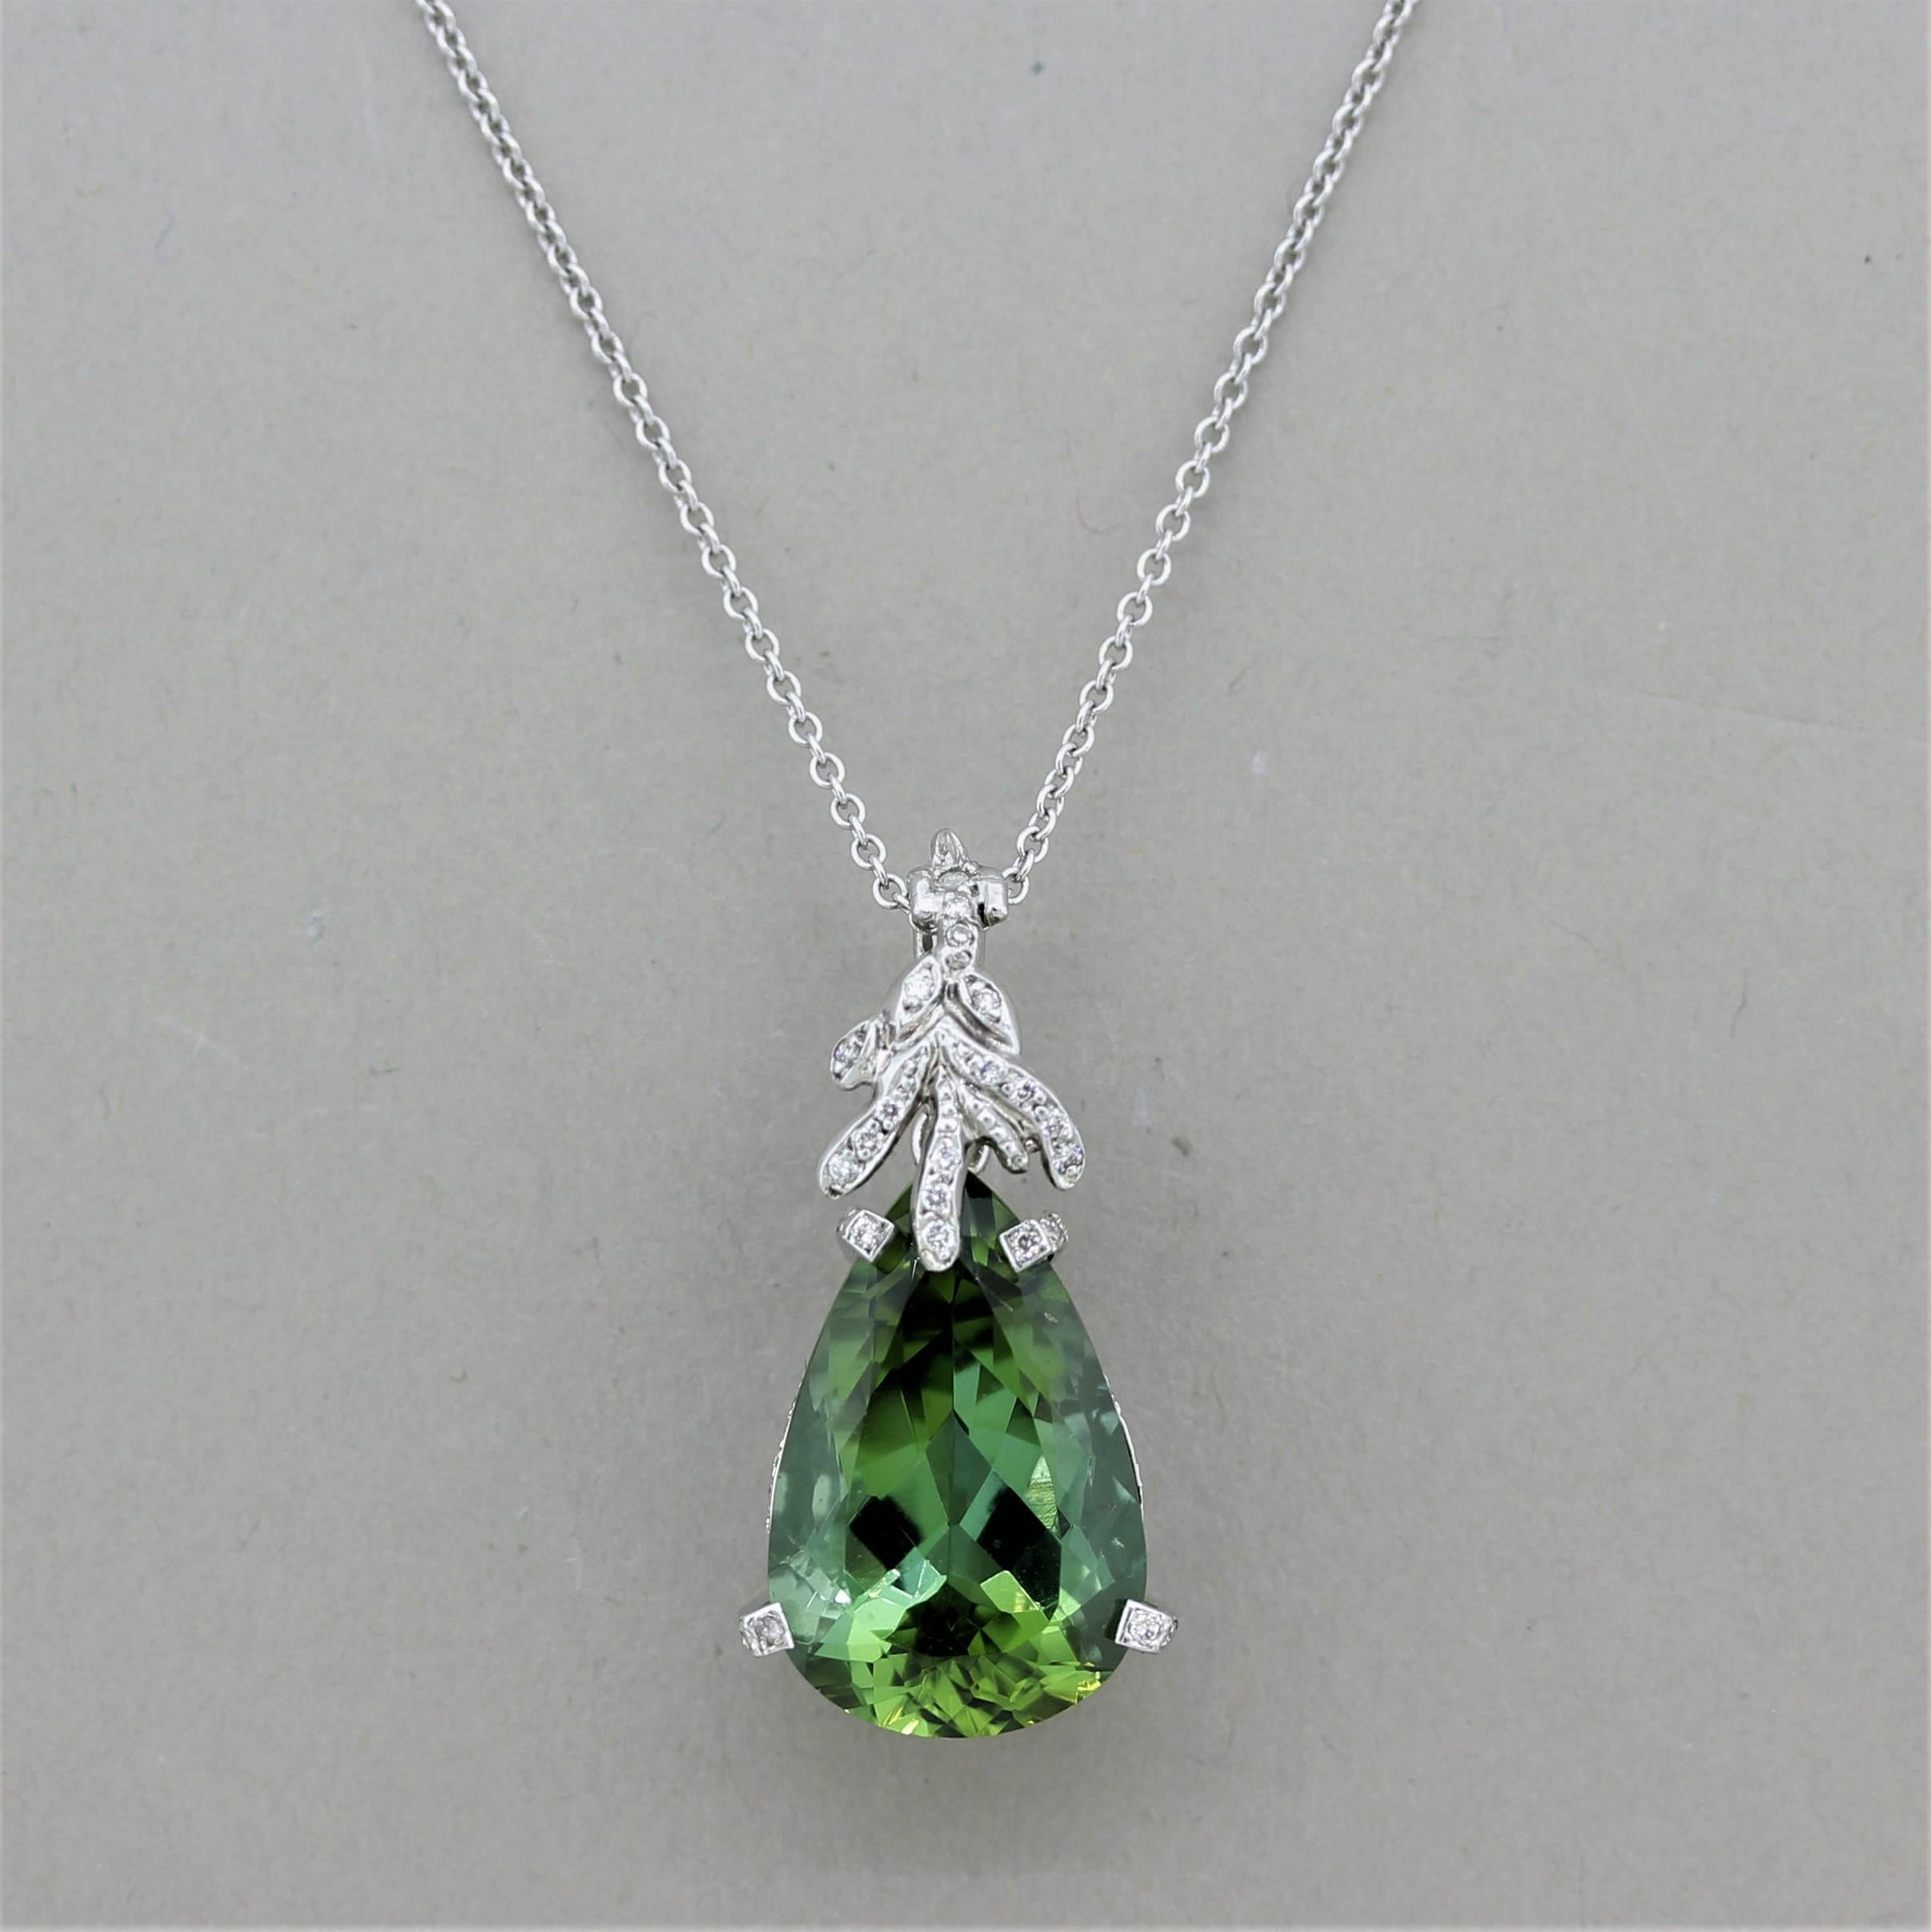 A fine gem tourmaline weighing 14.05 carats is the centerpiece of this floral style pendant. The tourmaline has a bright and vibrant green color with a soft blue undertone. It is set under a floral pattern set with diamonds suggesting the tourmaline